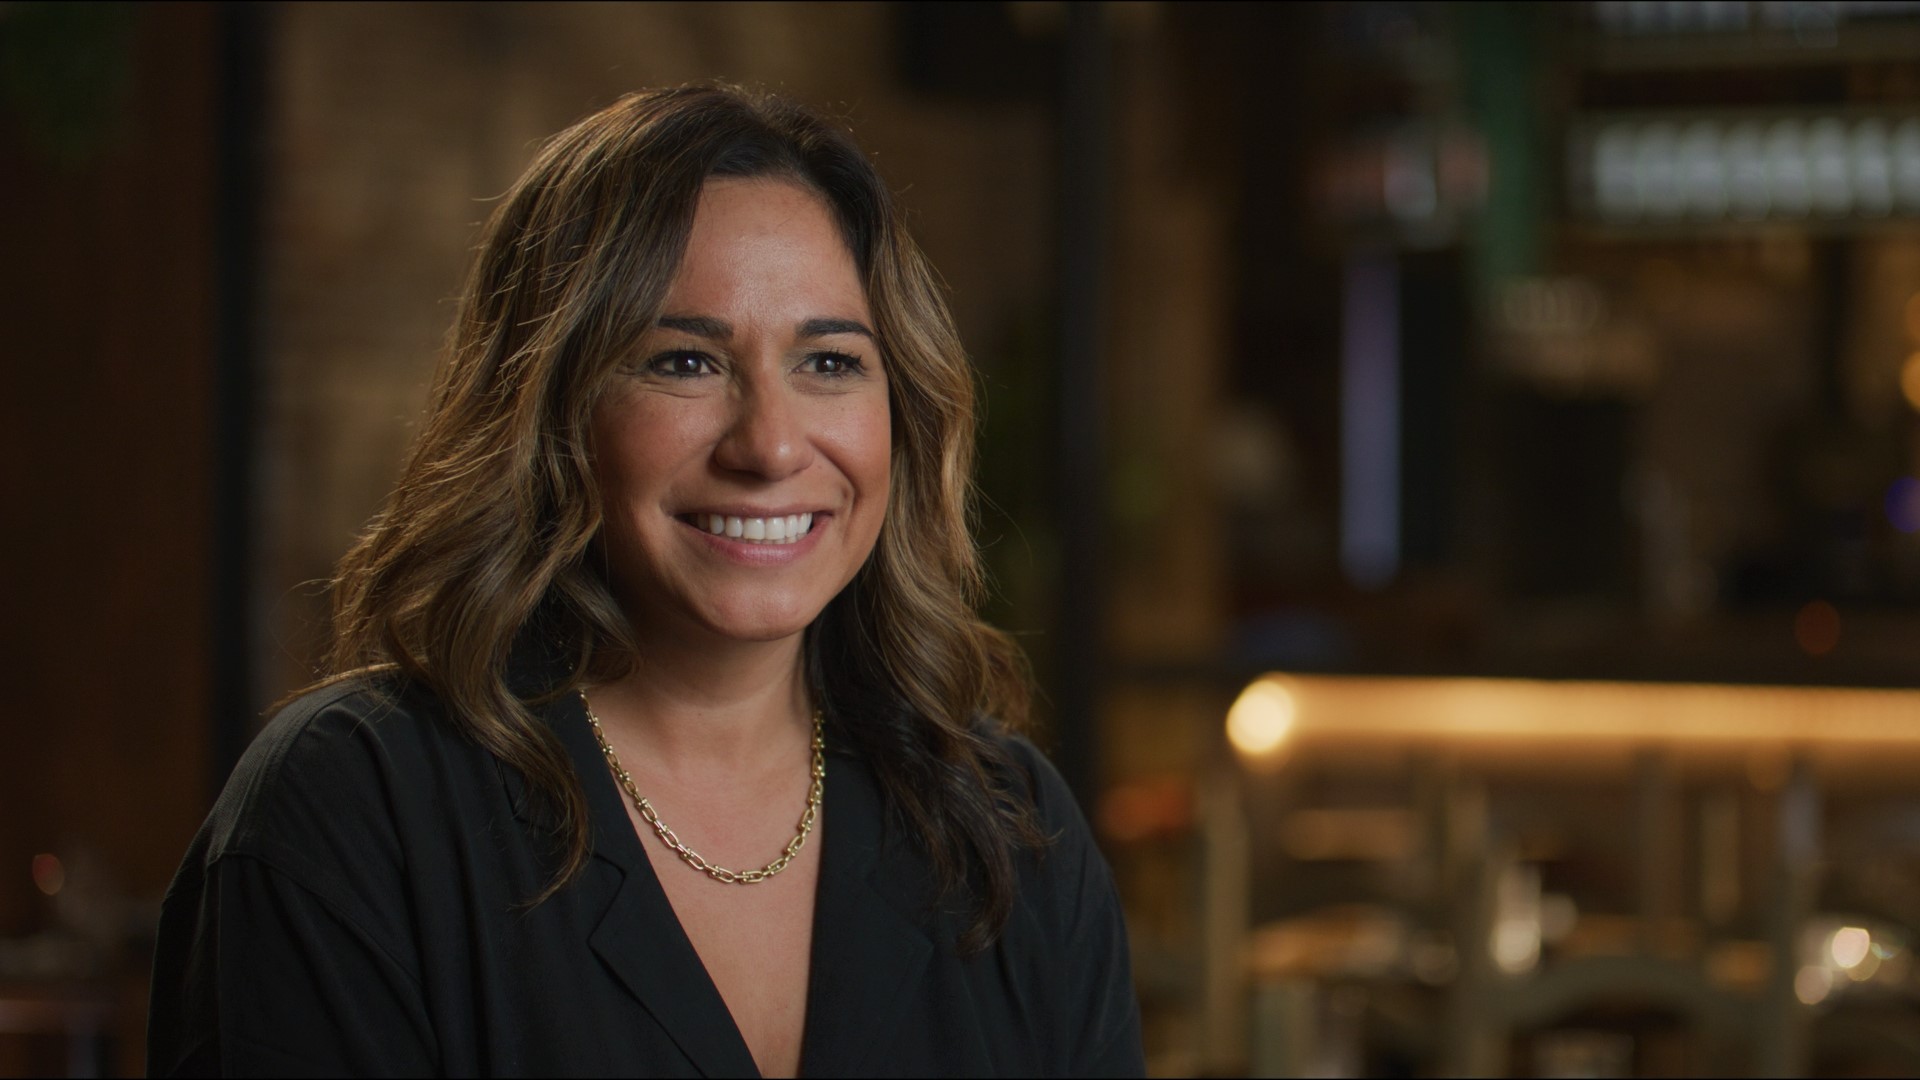 Fort Worth native, Sarah Castillo, is shaping the culinary, spirit, and real estate world of Fort Worth in her own, hometown, homegrown way.